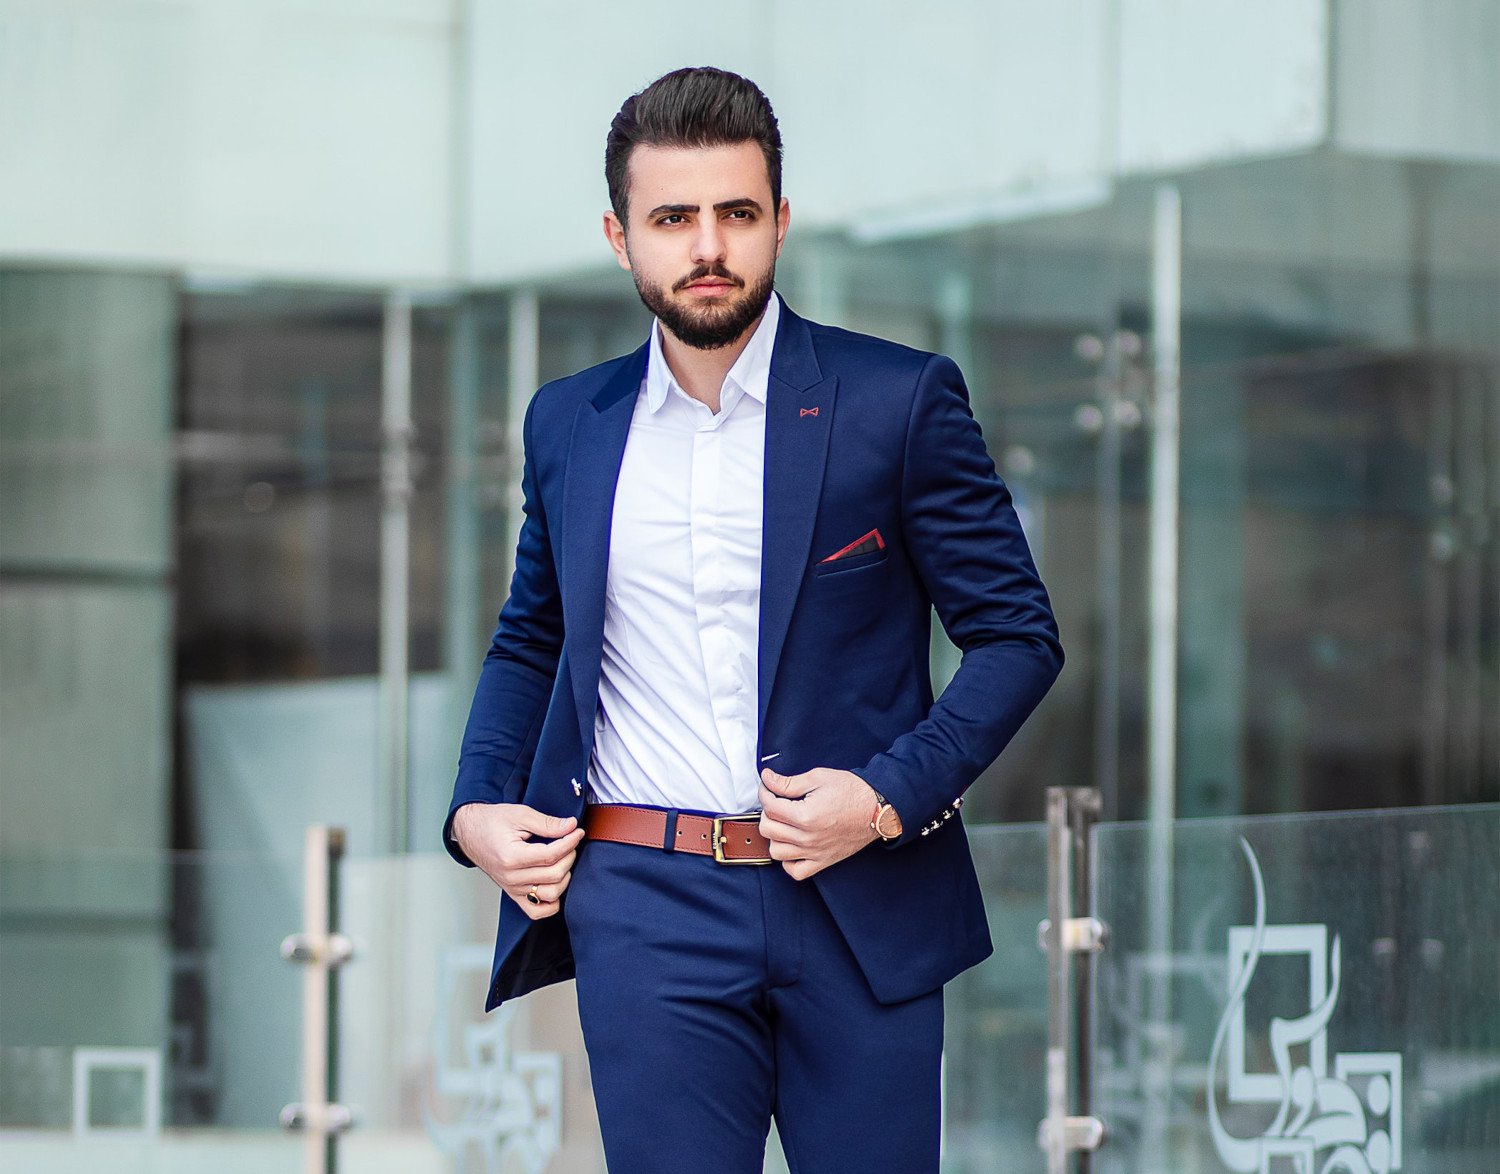 Sport Coat vs Blazer: What is the Difference Between These Types